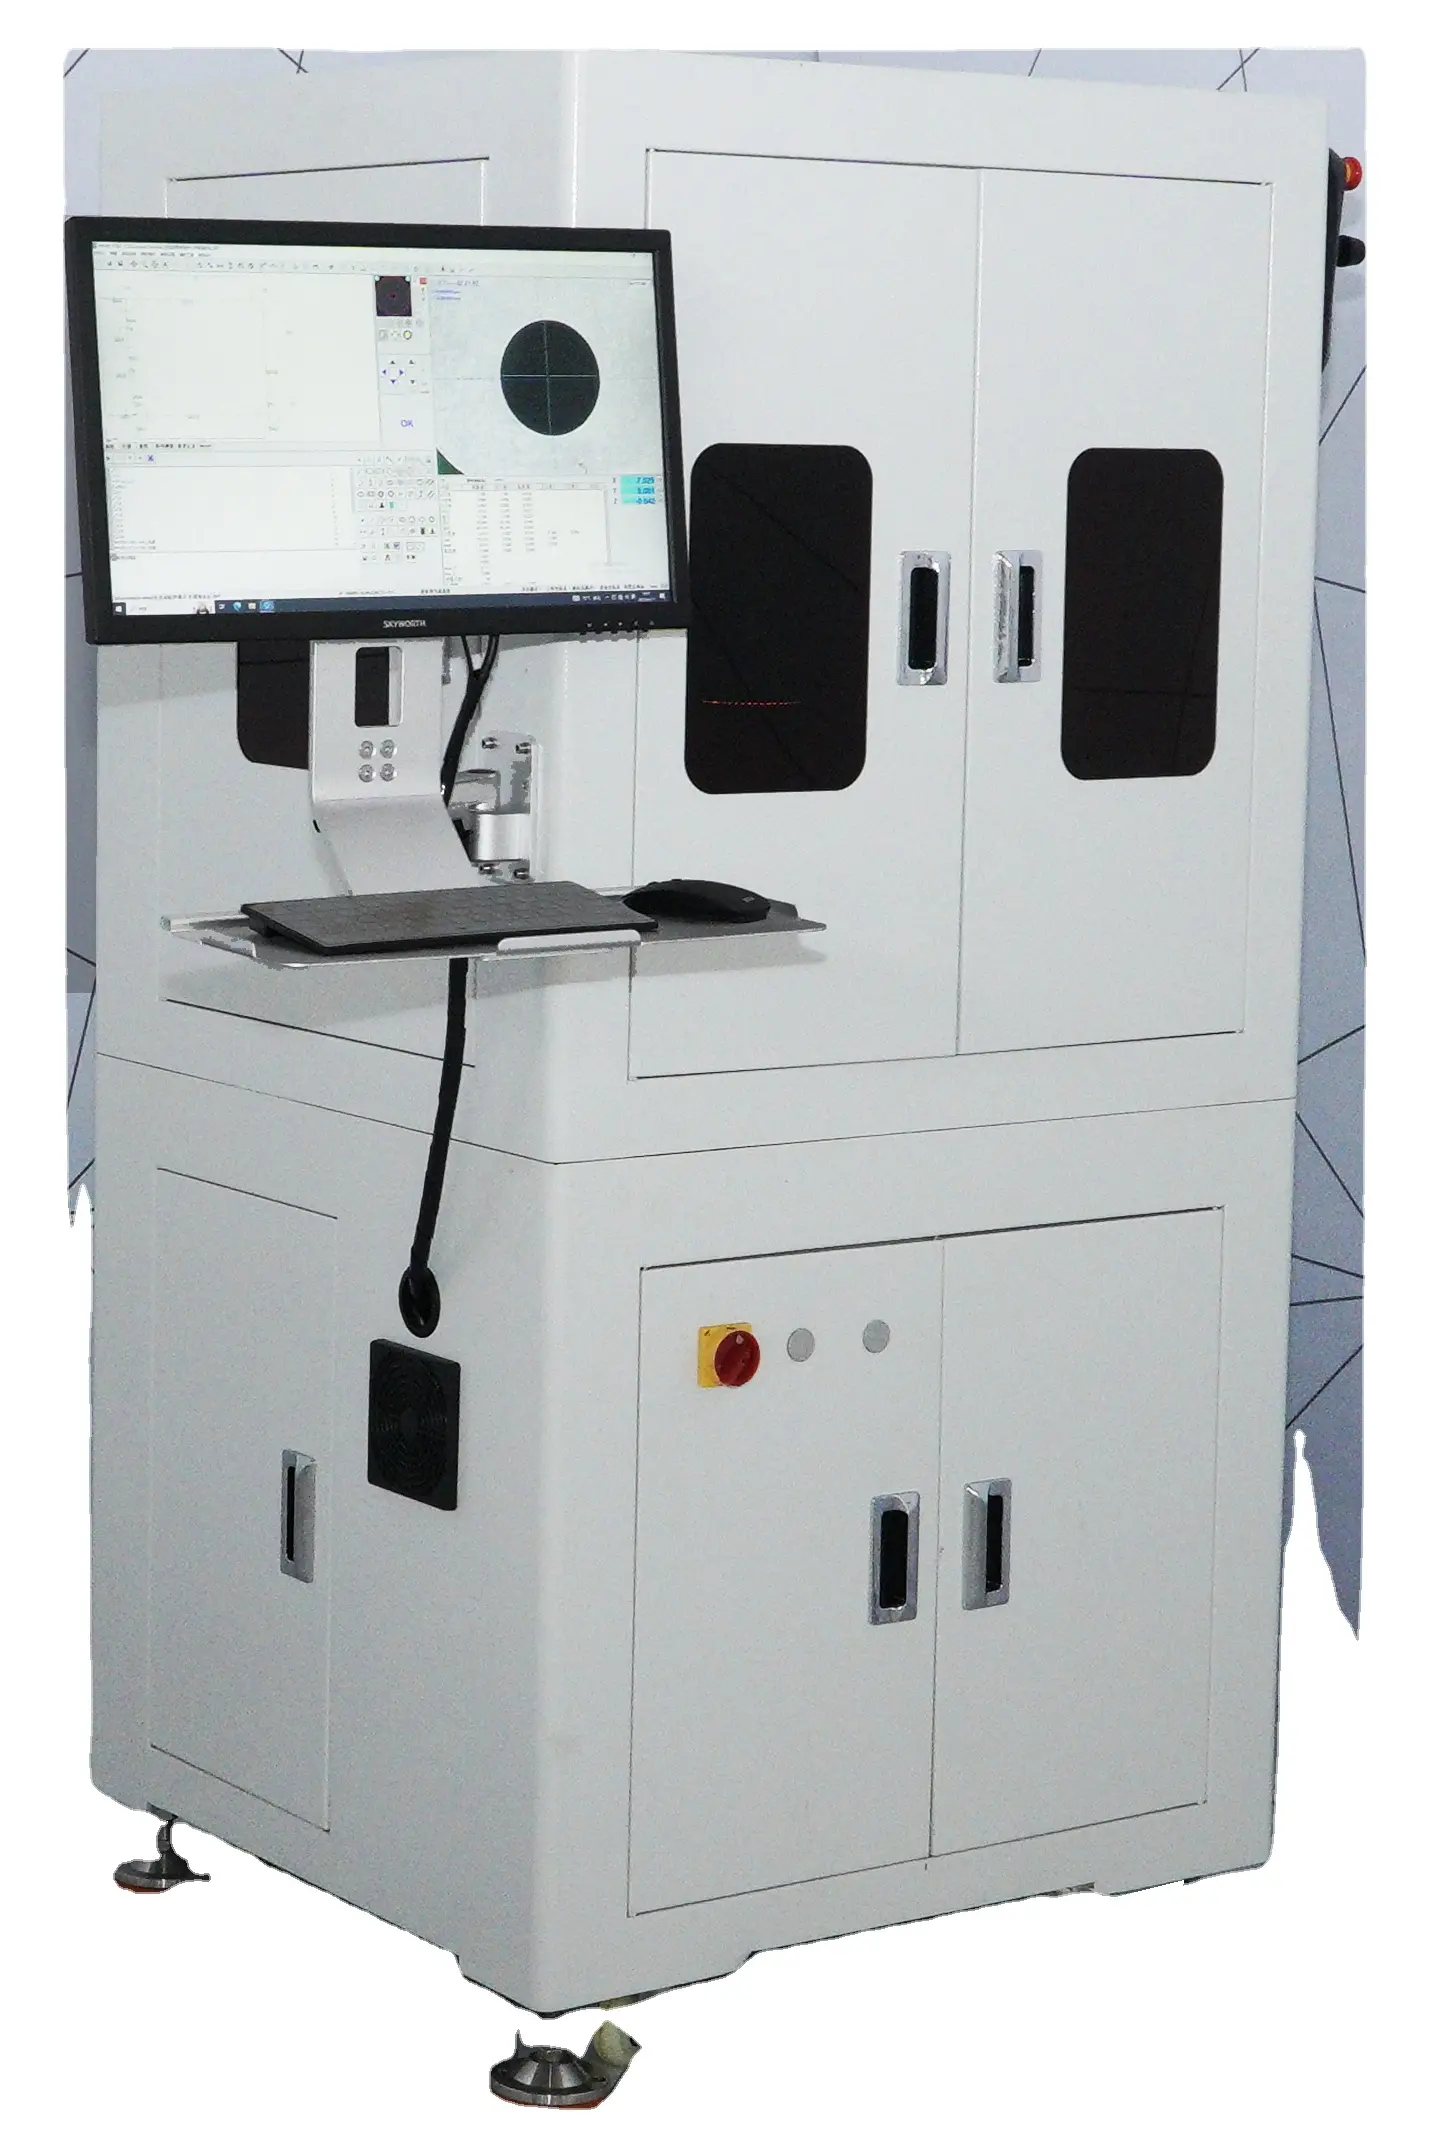 Nano level 3D automatic size measuring instrument for professional testing in the nuclear industry field